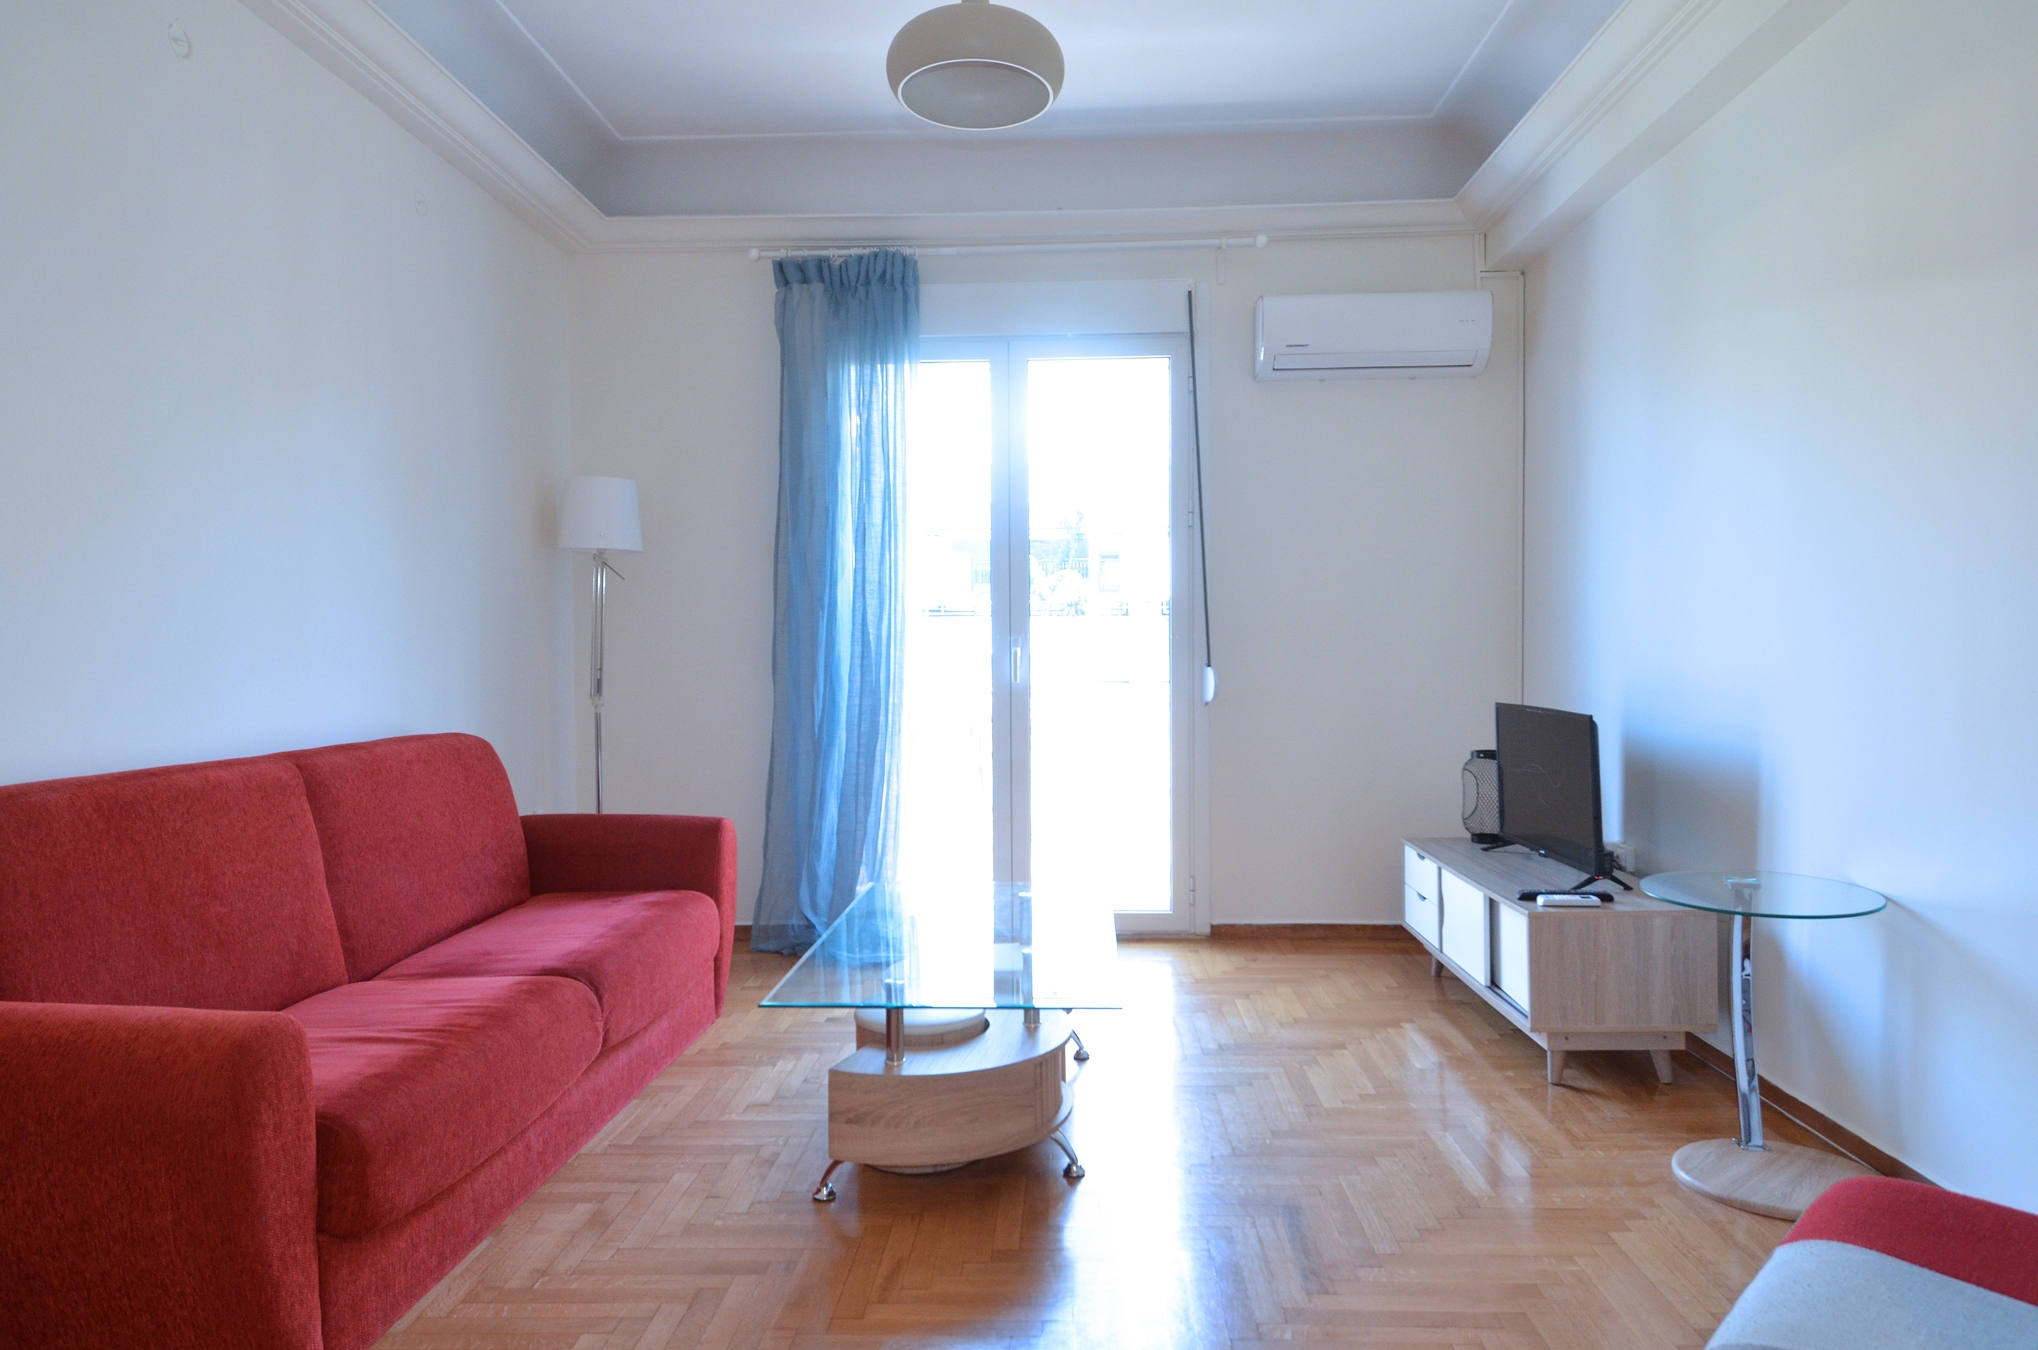 Modern and Comfortable Apartment 6ppl, close to the city center